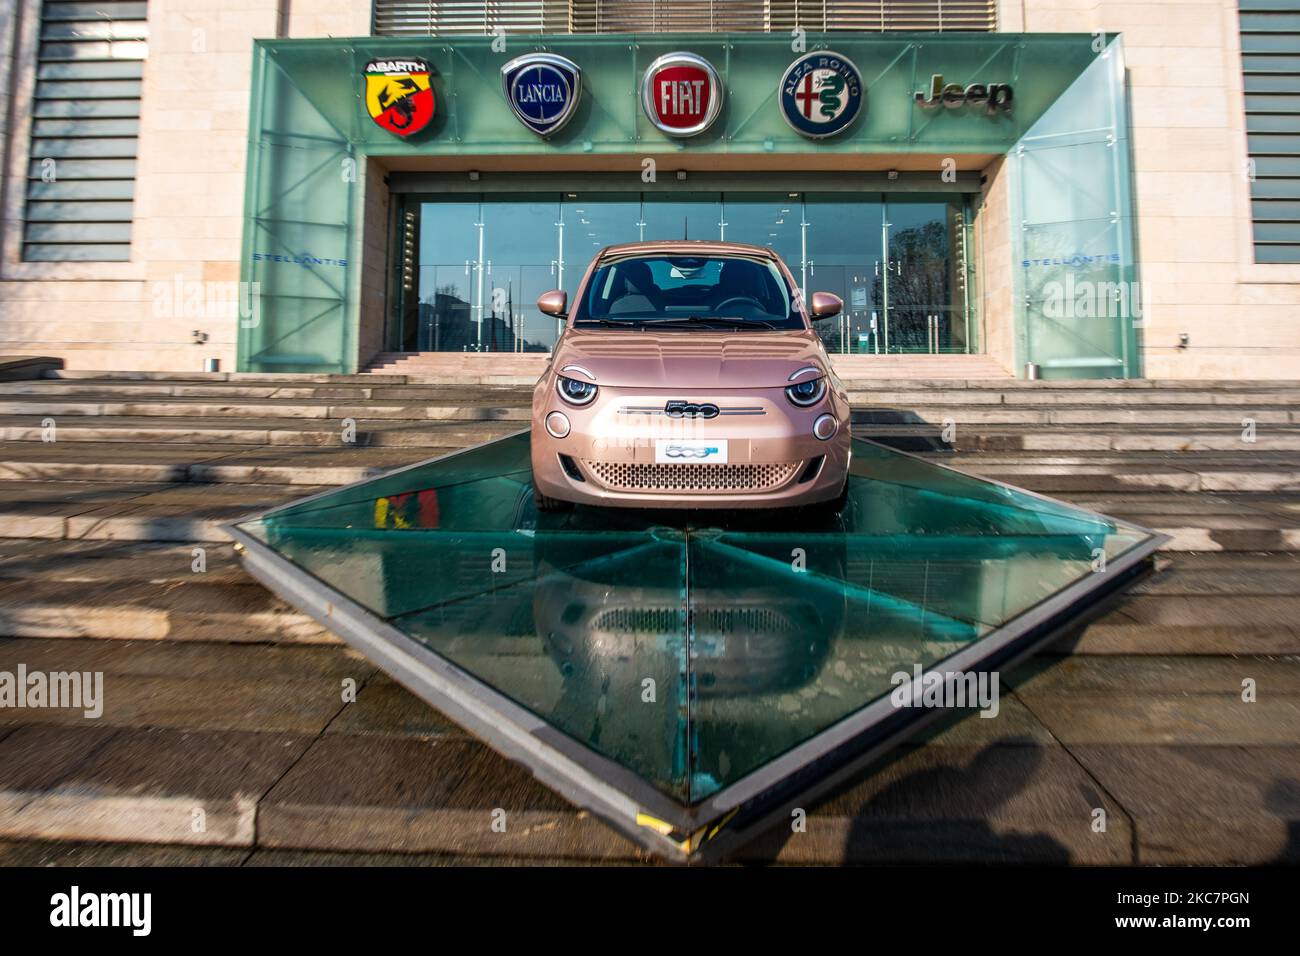 A view of the historical FIAT plant in Turin, Italy, on January 18, 2021. The historical FIAT plant of Mirafiori showcases the new logo on the First day on the stock-market for Stellantis the multinational automotive manufacturing corporation resulting from the merger of French automaker Groupe PSA and Italian-American automaker Fiat Chrysler Automobiles. The group includes 14 brands: Abarth, Alfa Romeo, Chrysler, Citroen, Dodge, DS, Fiat, Jeep, Lancia, Maserati, Opel, Peugeot, Ram, and Vauxhall. (Photo by Mauro Ujetto/NurPhoto) Stock Photo